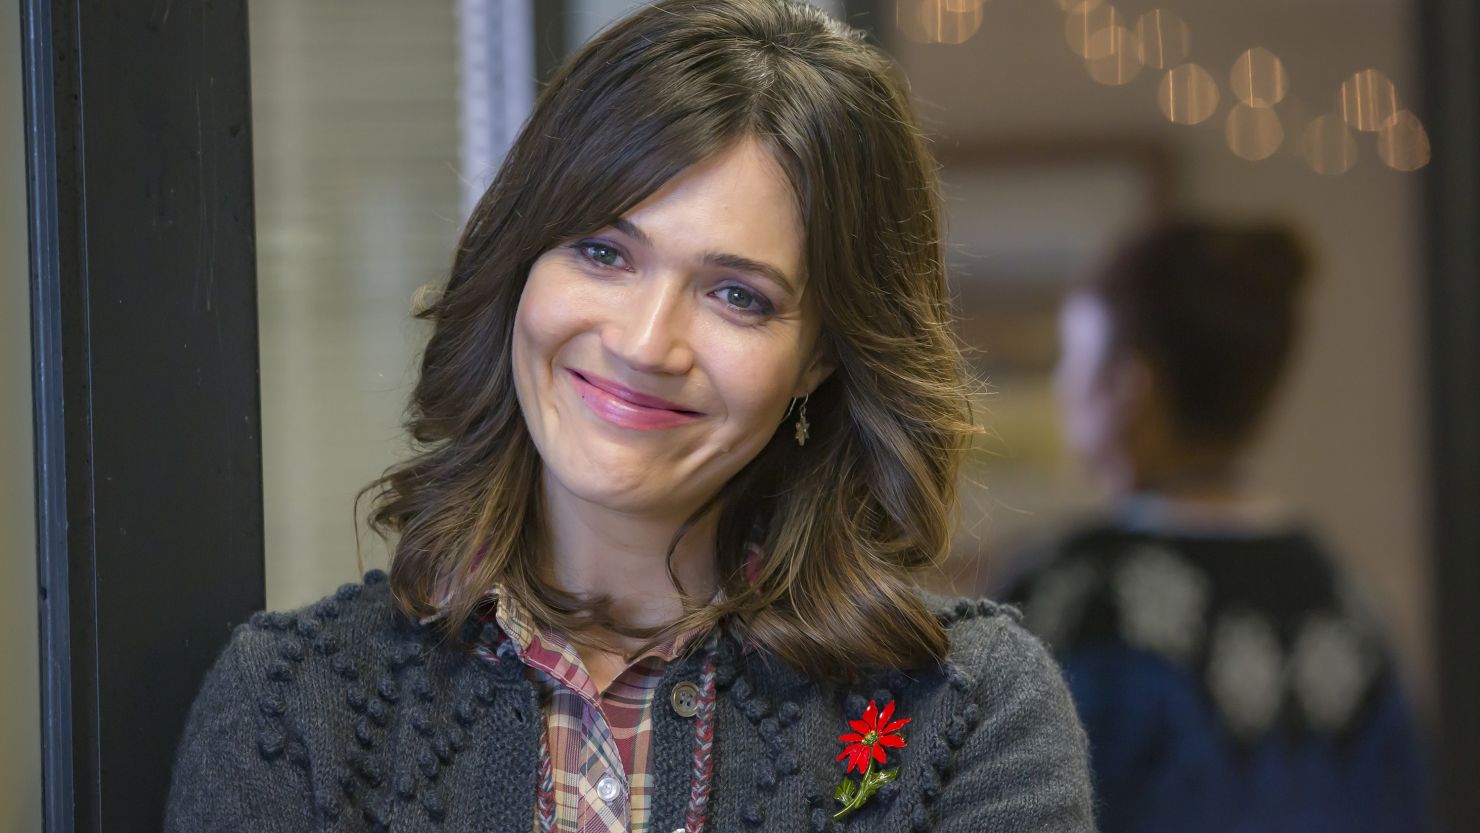 Mandy Moore as Rebecca in the "This Is Us" episode "Last Christmas,"